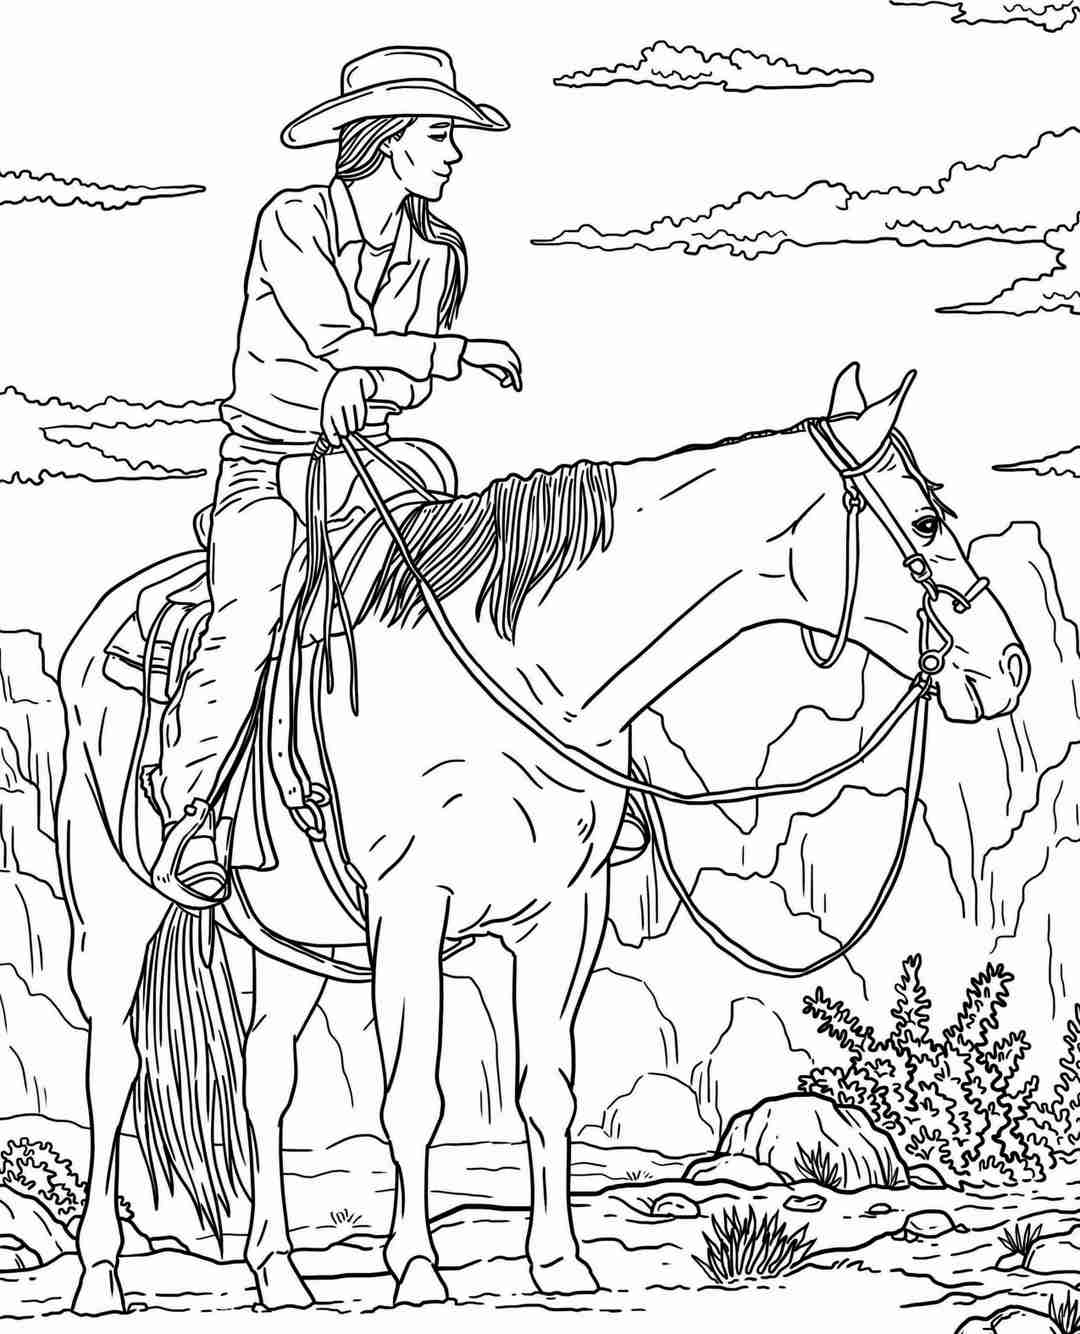 ColorIt Free Coloring Page Freebie Friday Blissful Scenes II Giddy Up 2021-02-26